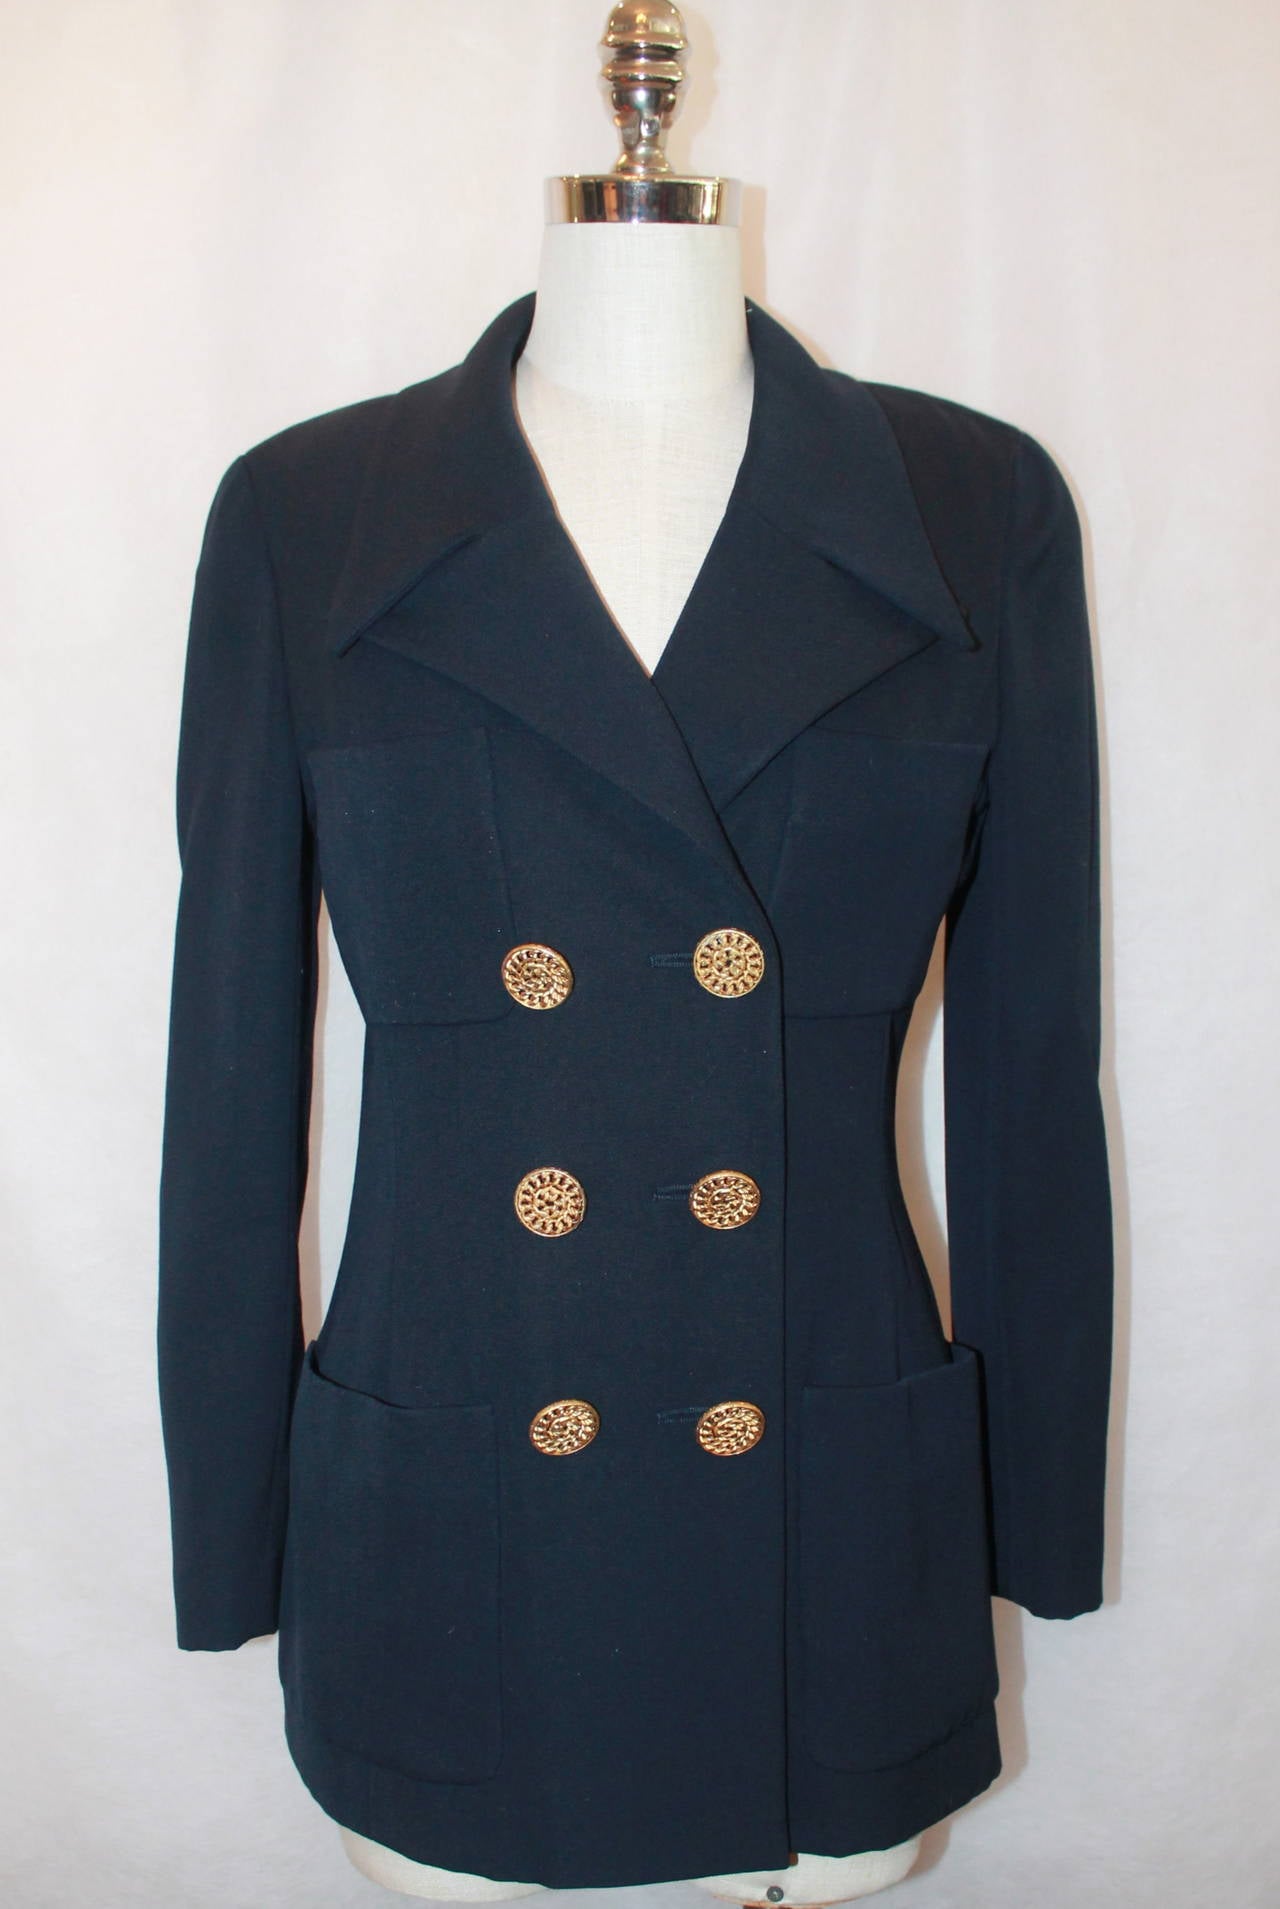 Chanel 1980's Vintage Navy Wool Blend 4-Pocket Jacket - M. This jacket is in very good vintage condition with light wear. It was 6 large buttons and 4 pockets on the front. 

Measurements:
Bust- 34"
Shoulder to Shoulder- 15"
Waist-